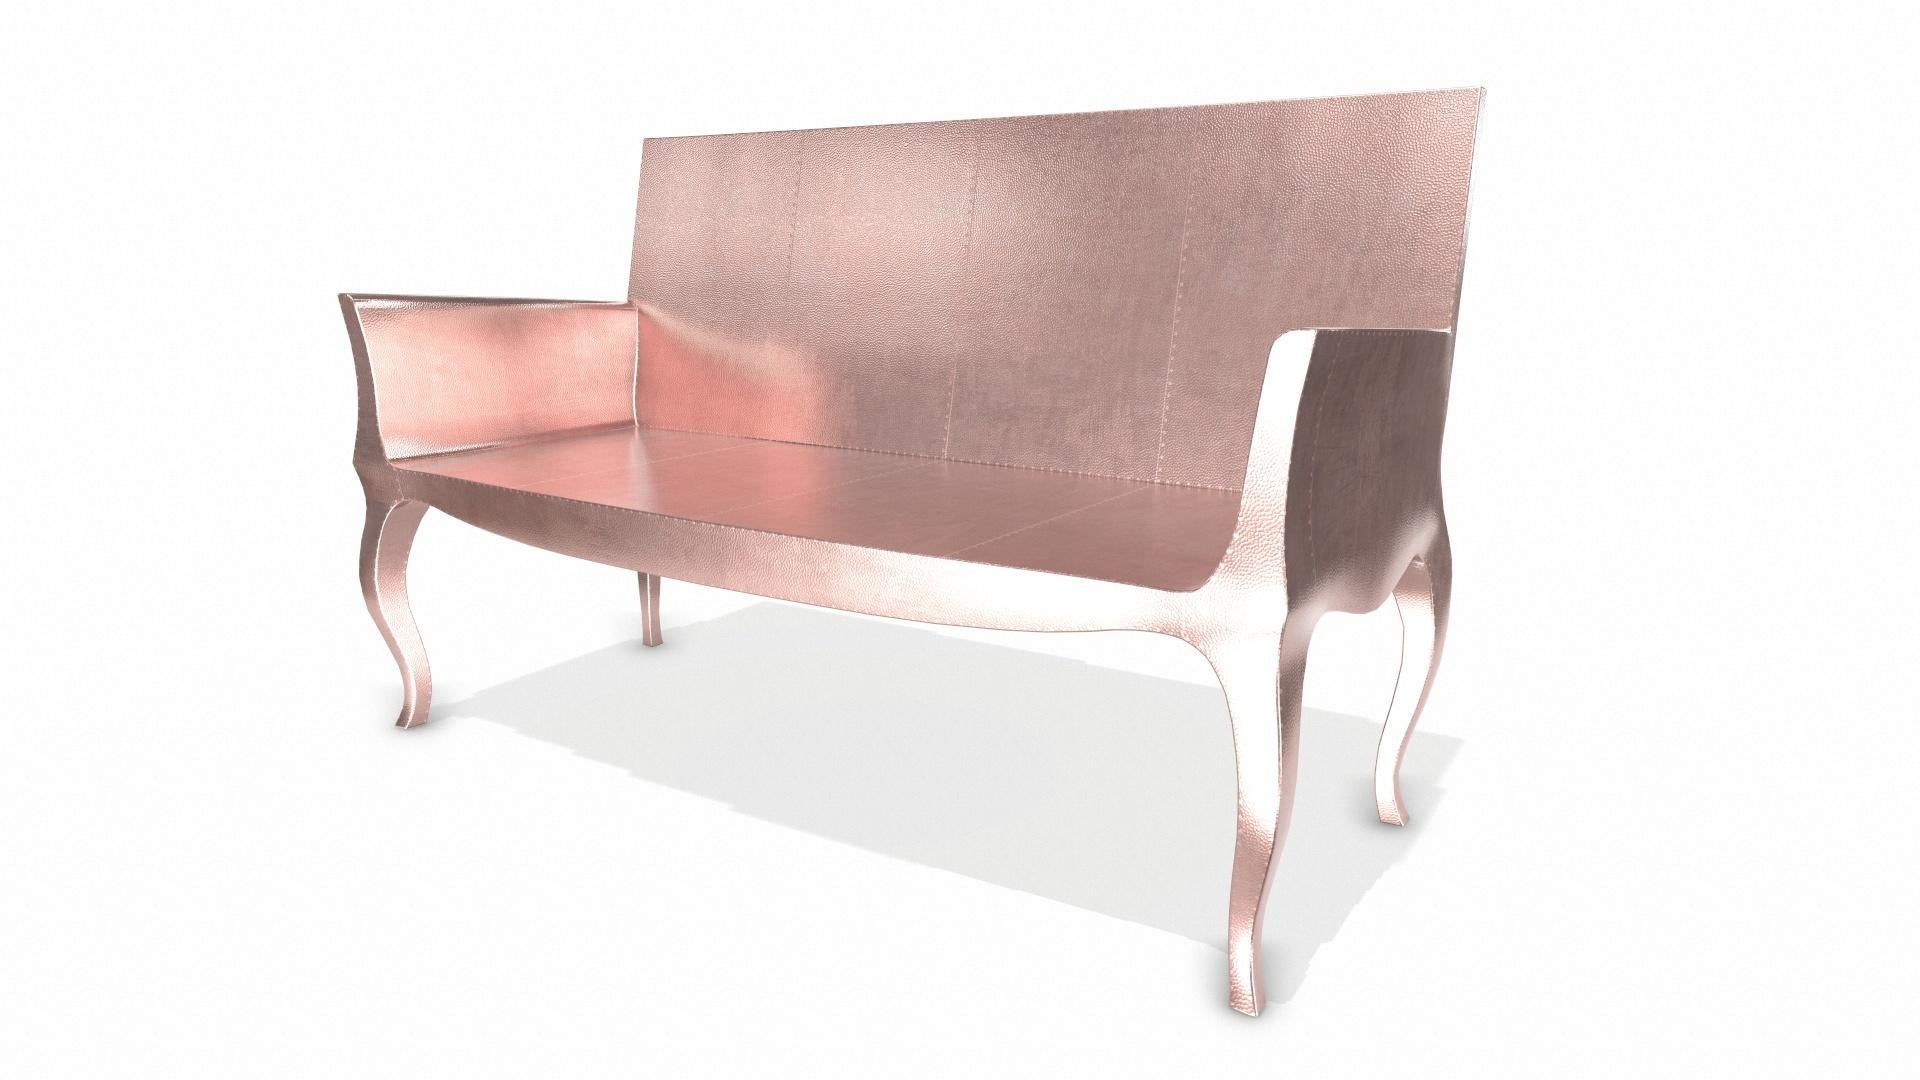 American Louise Settee Art Deco Living Room Sets in Mid. Hammered Copper by Paul Mathieu For Sale